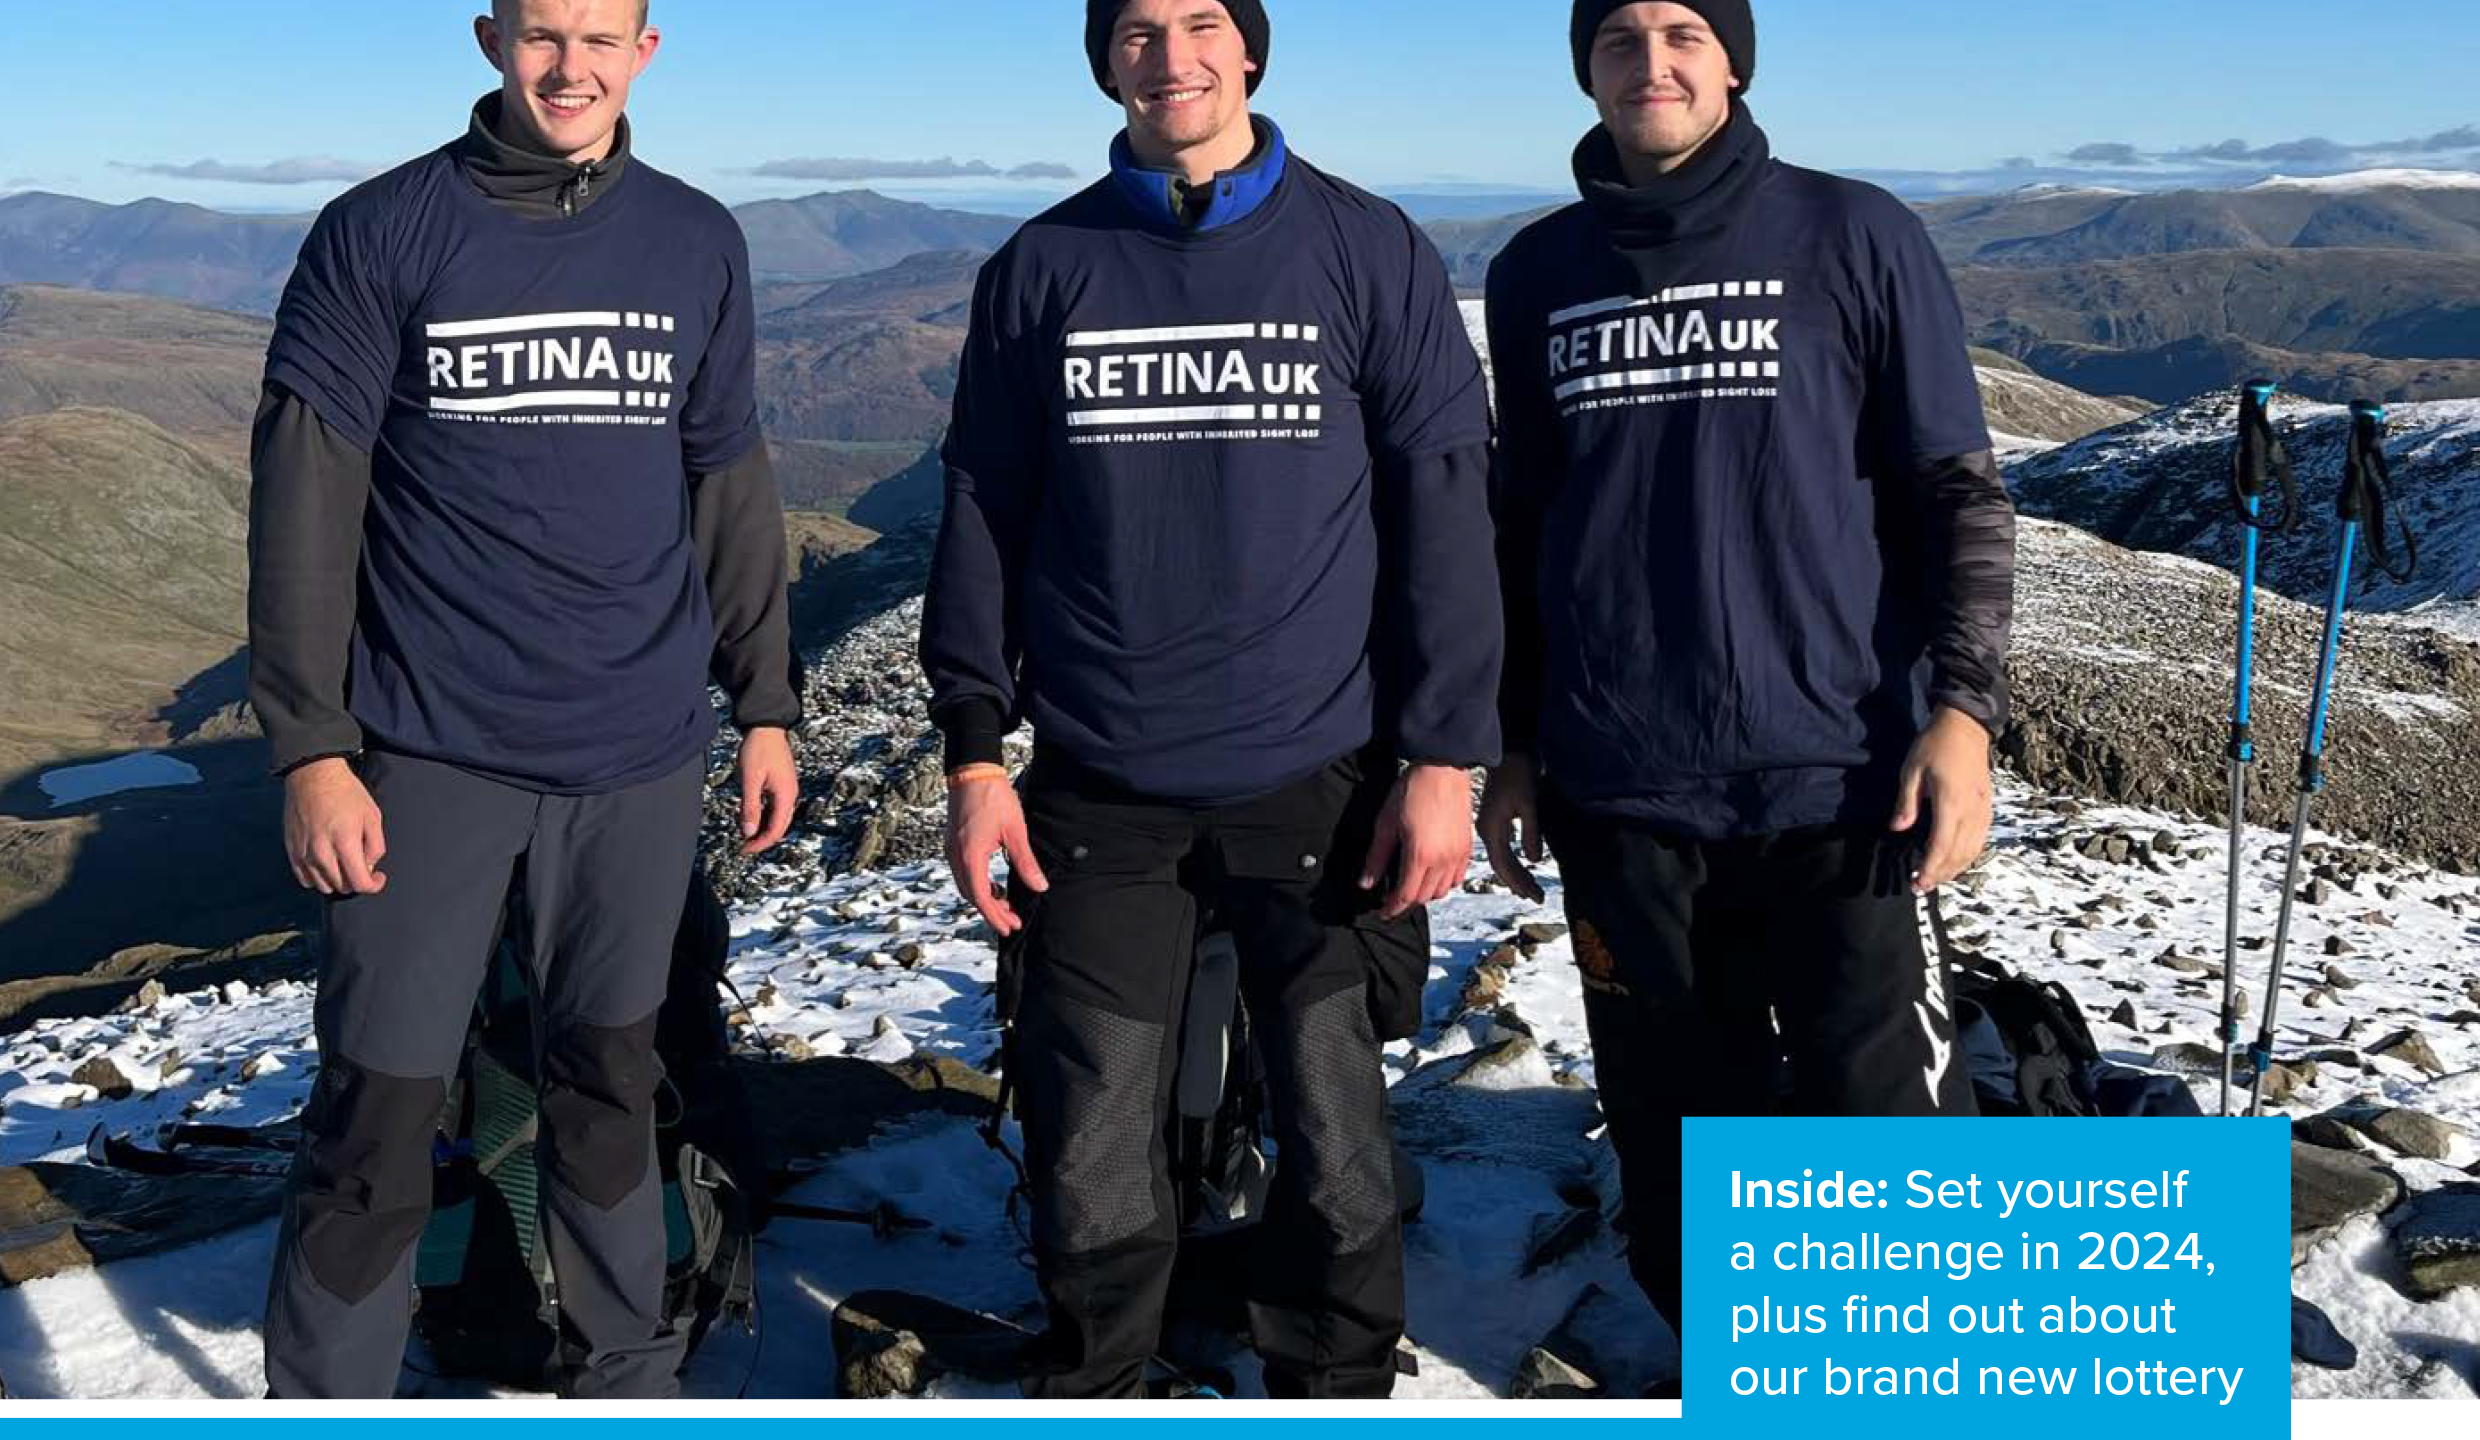 The cover of the Spring 2024 edition of Look Forward, featuring a photo of three men wearing Retina UK tshirts on a mountain.